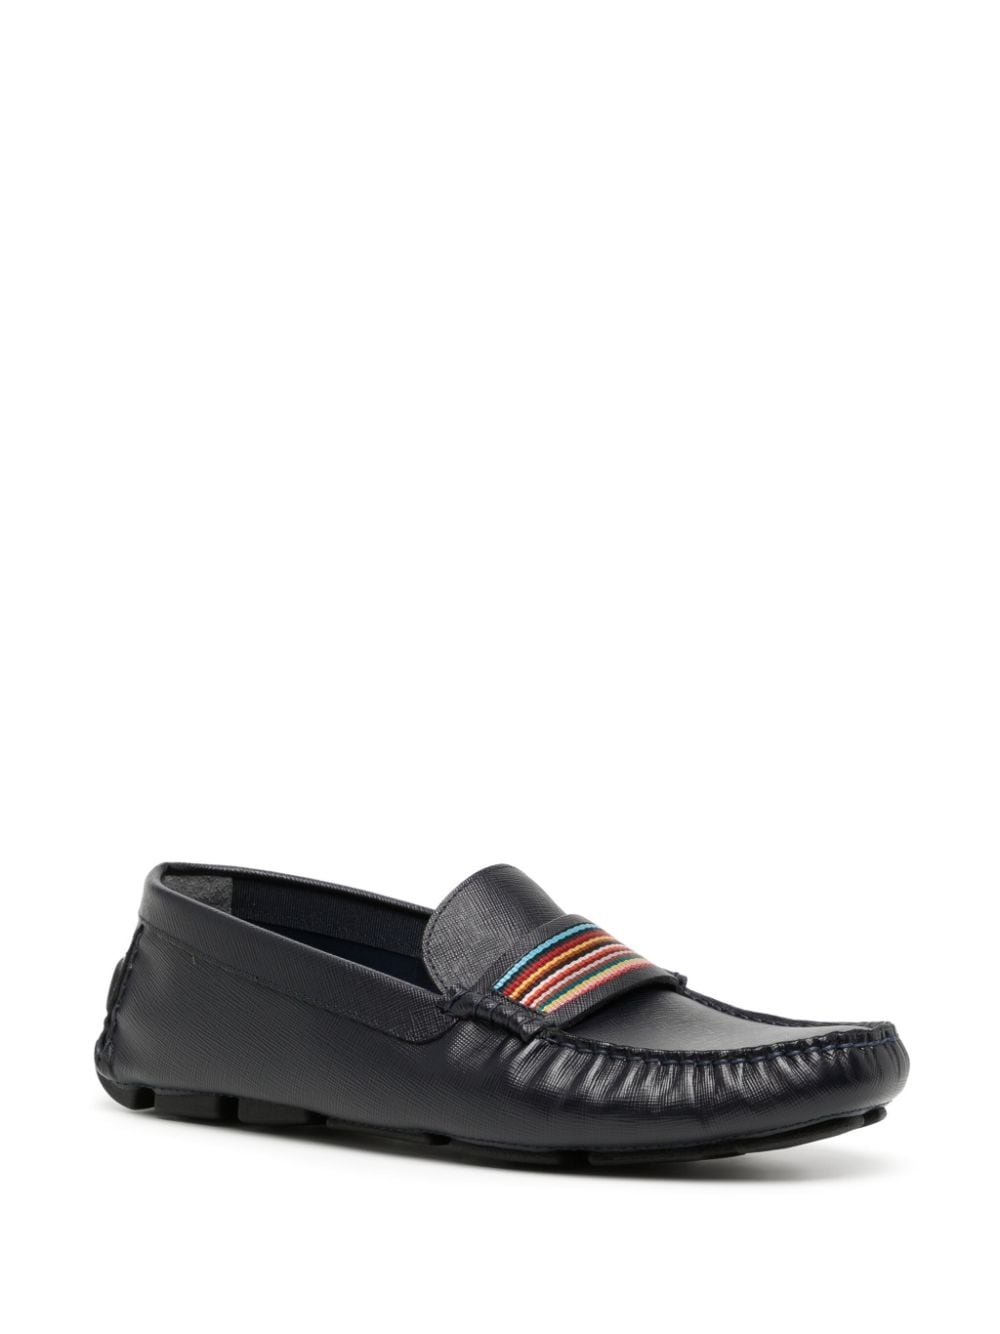 rainbow-stripe leather boat shoes - 2